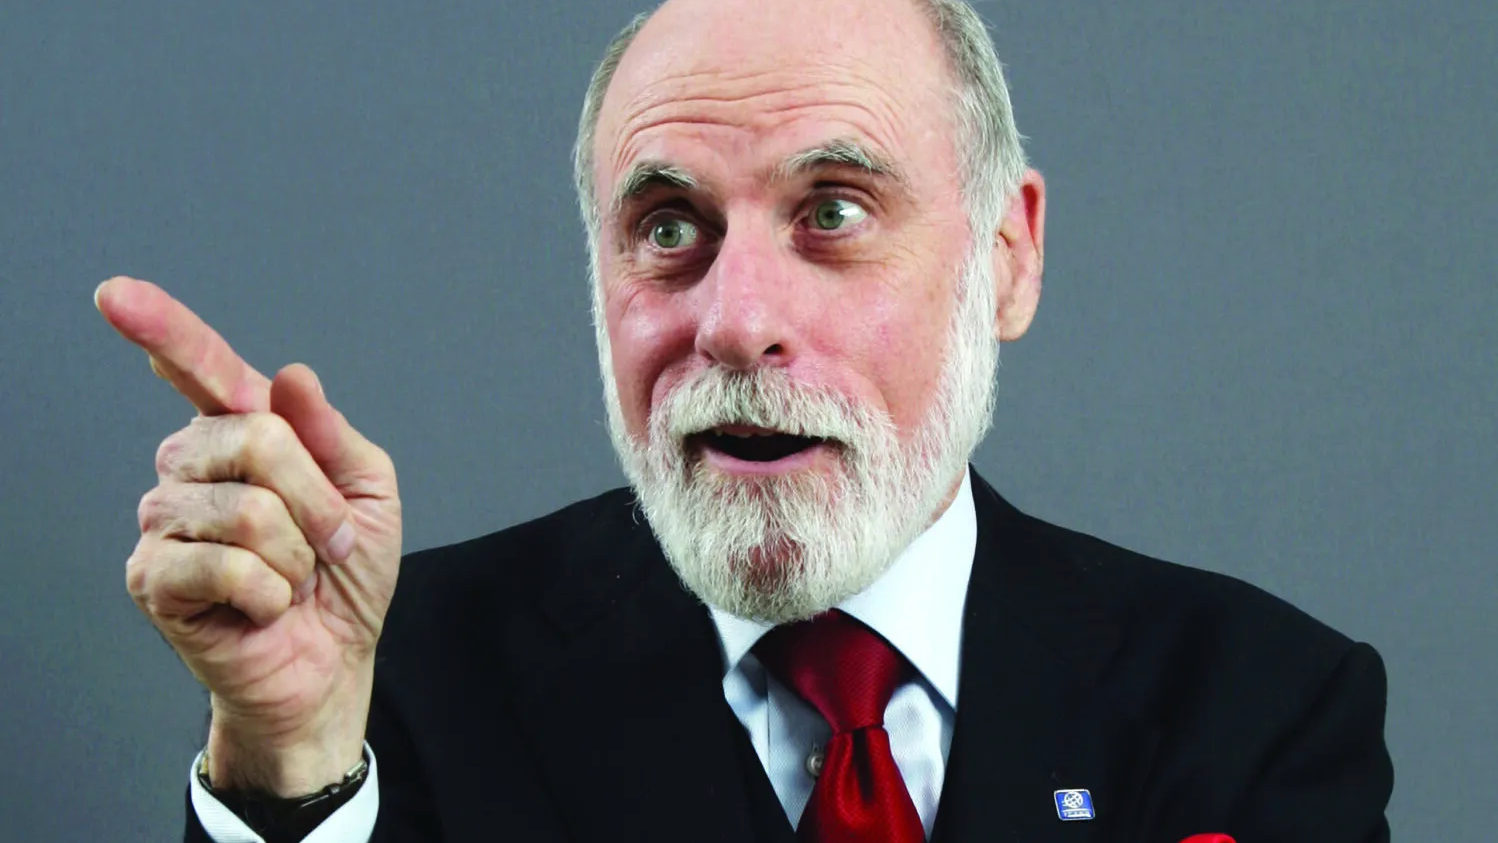 Technologist Vint Cerf in a suit